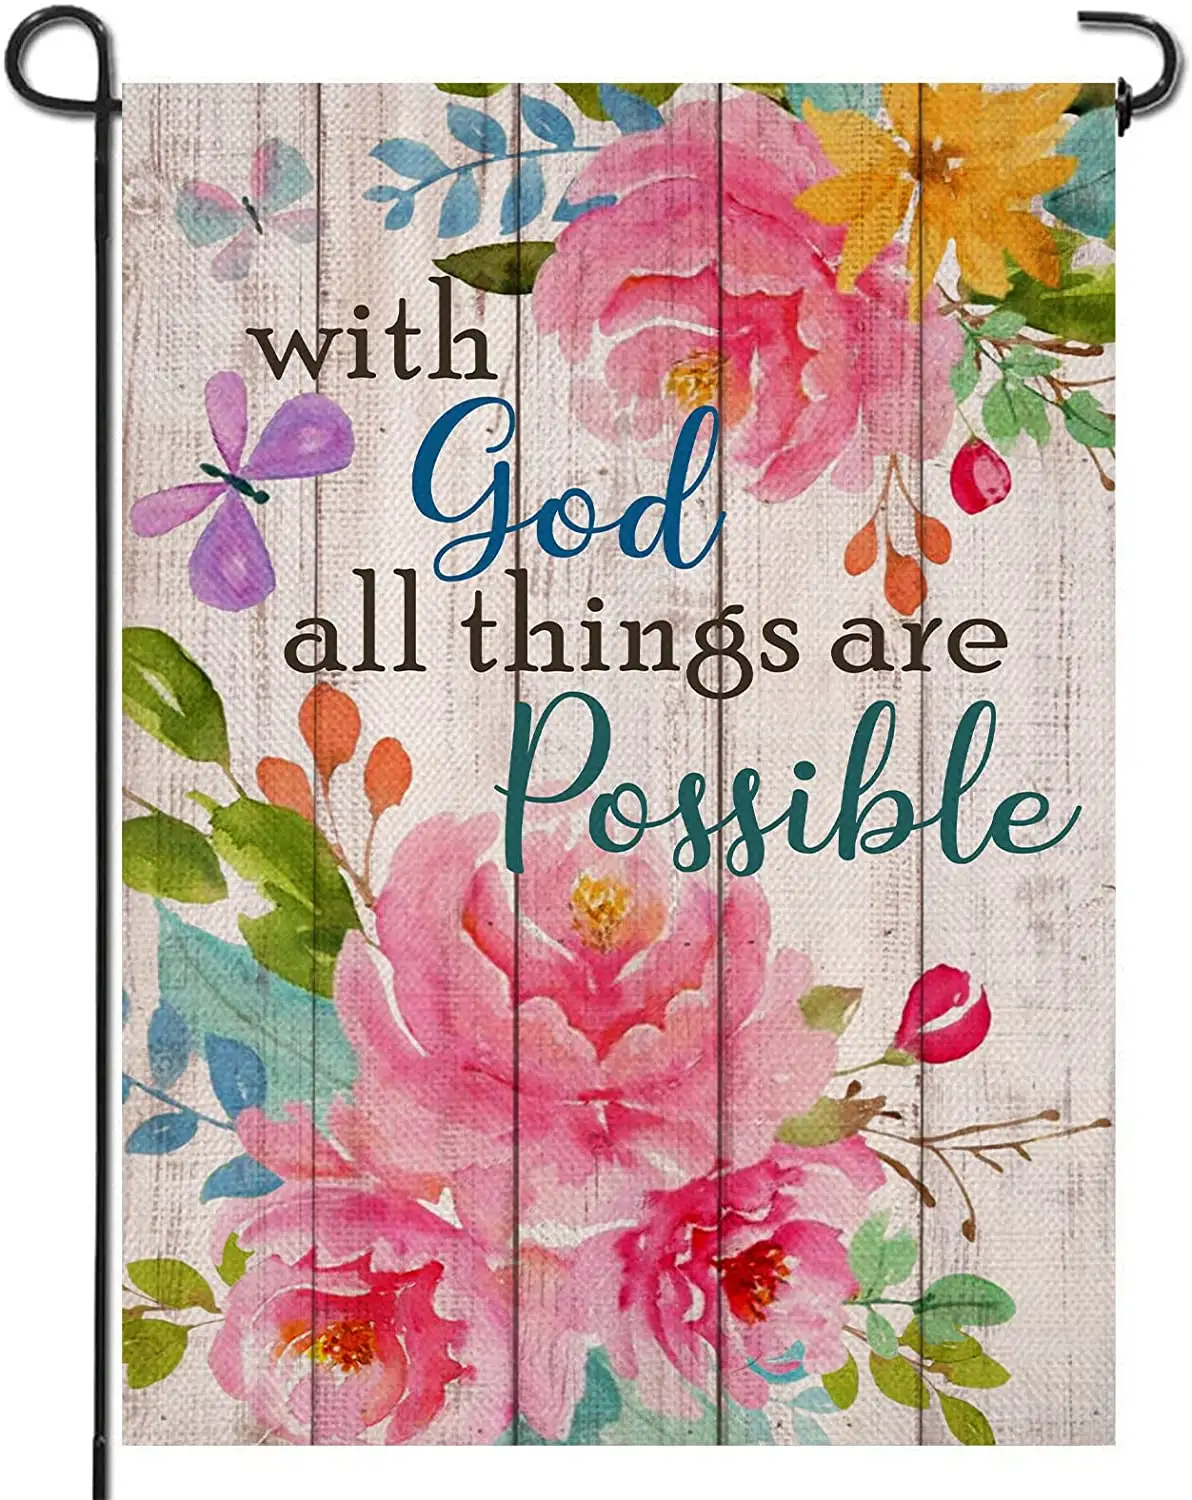 12x18IN Vertical Double Sided with God all Things are Possible Burlap Garden Flags For Yard Outdoor Decorations